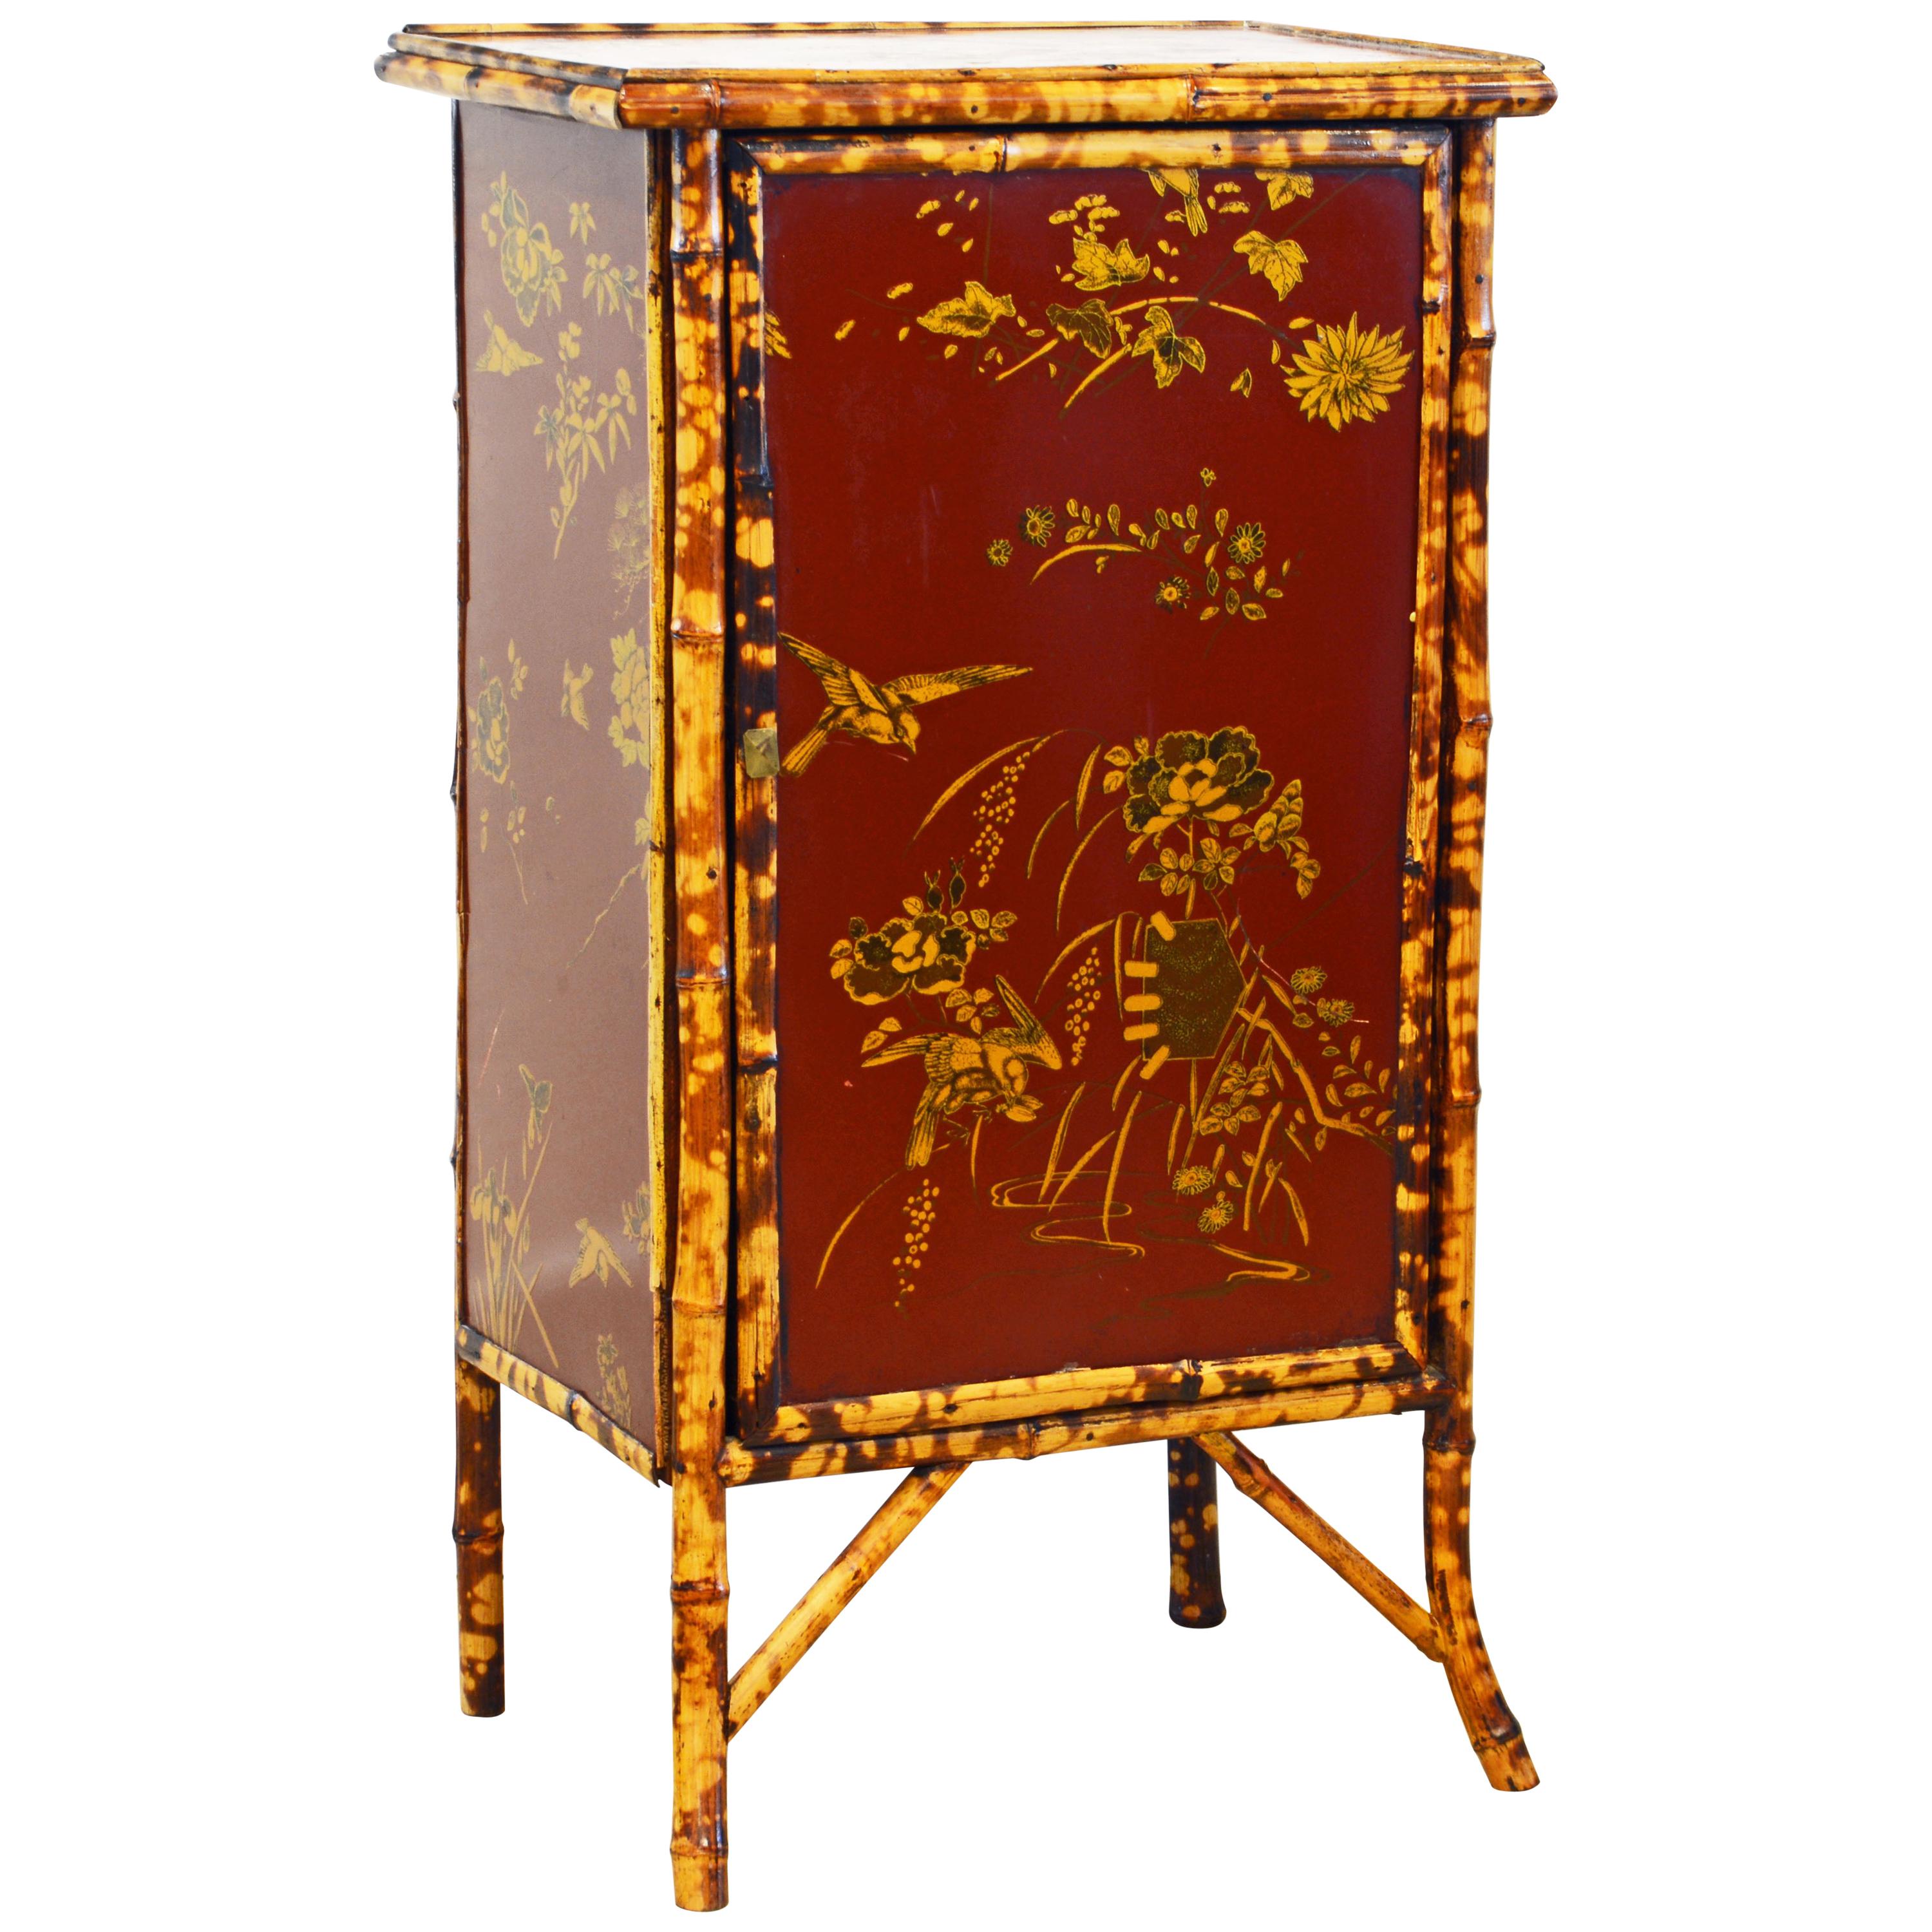 19th Century English Bamboo and Red Lacquer Chinoiserie Gilt Decorated Cabinet